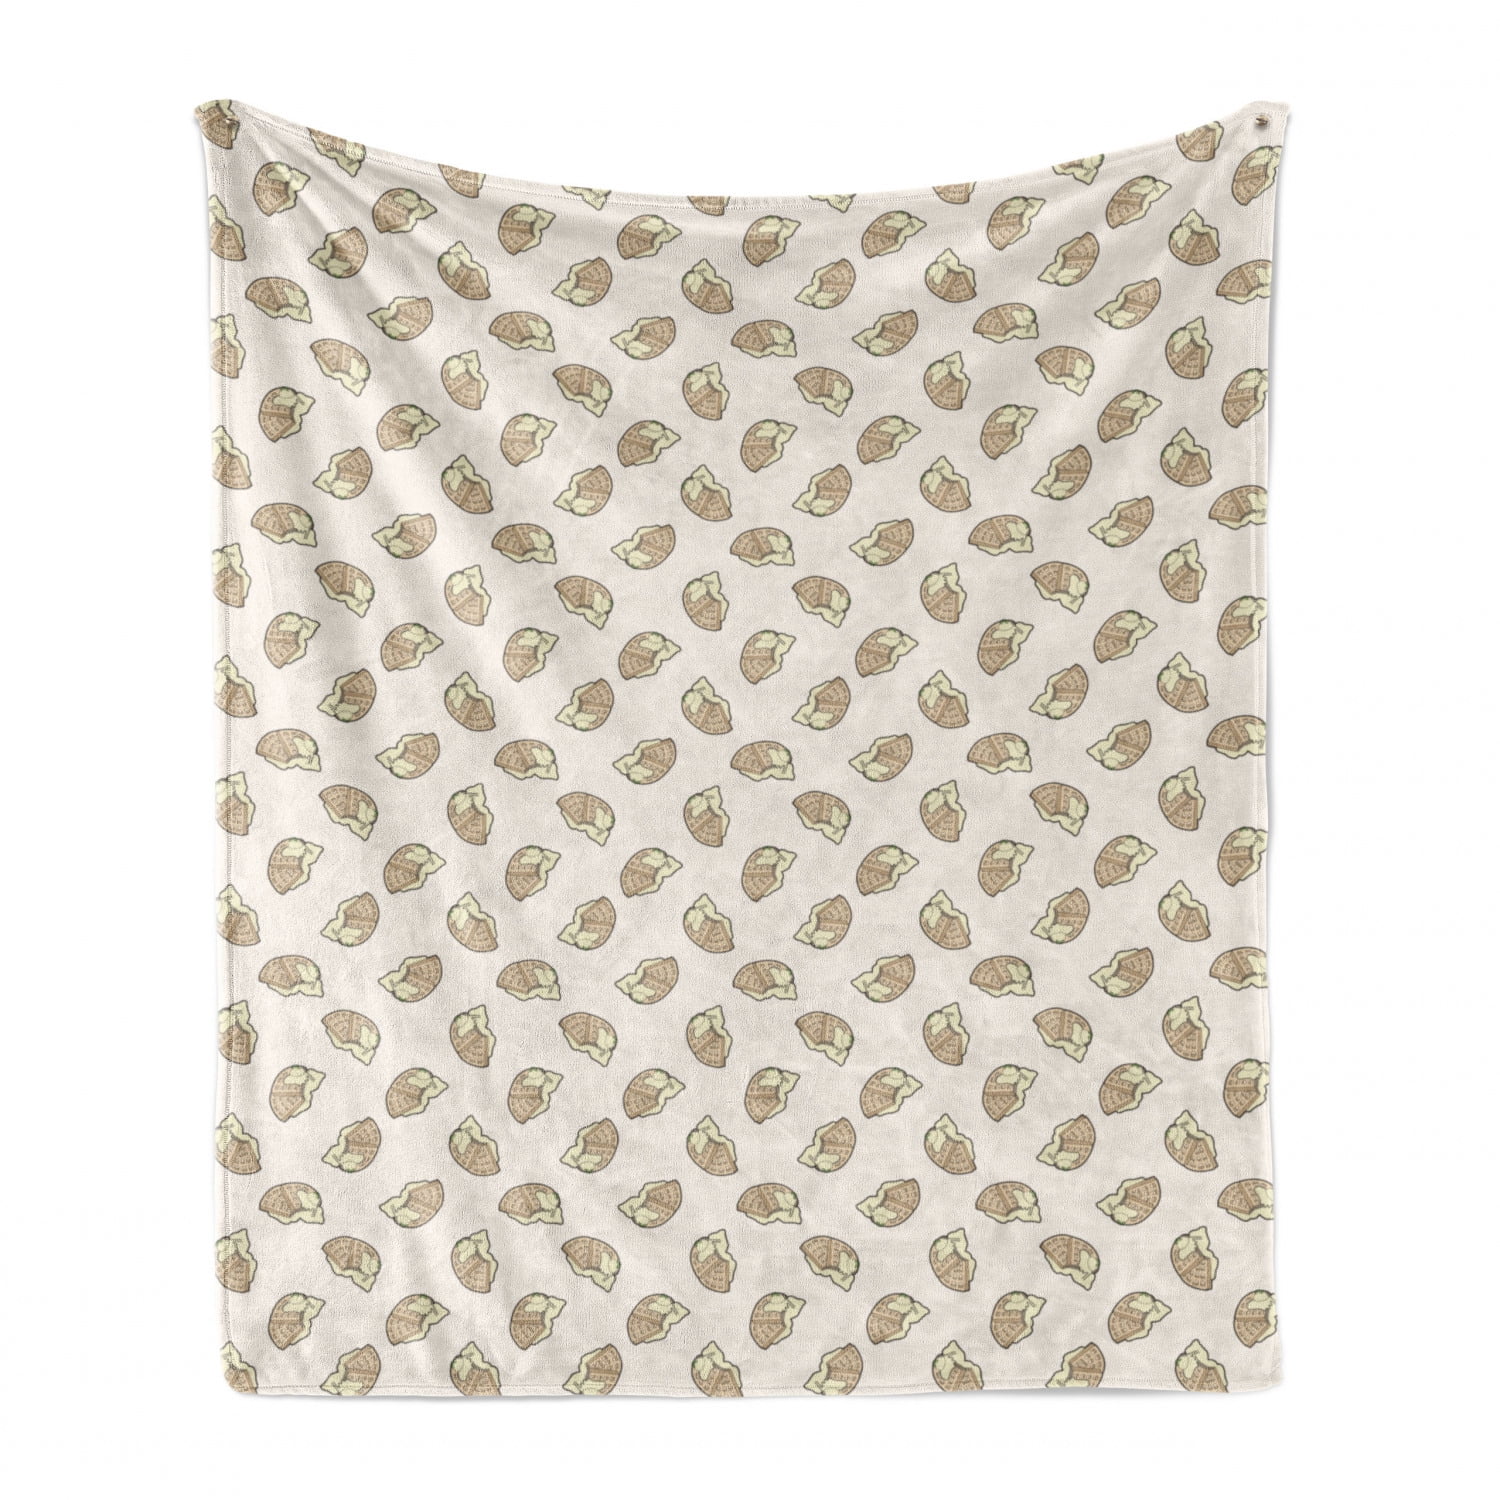 Tan and Cream Paw Print Waffle Texture With Sherpa Lined Pet Blanket 